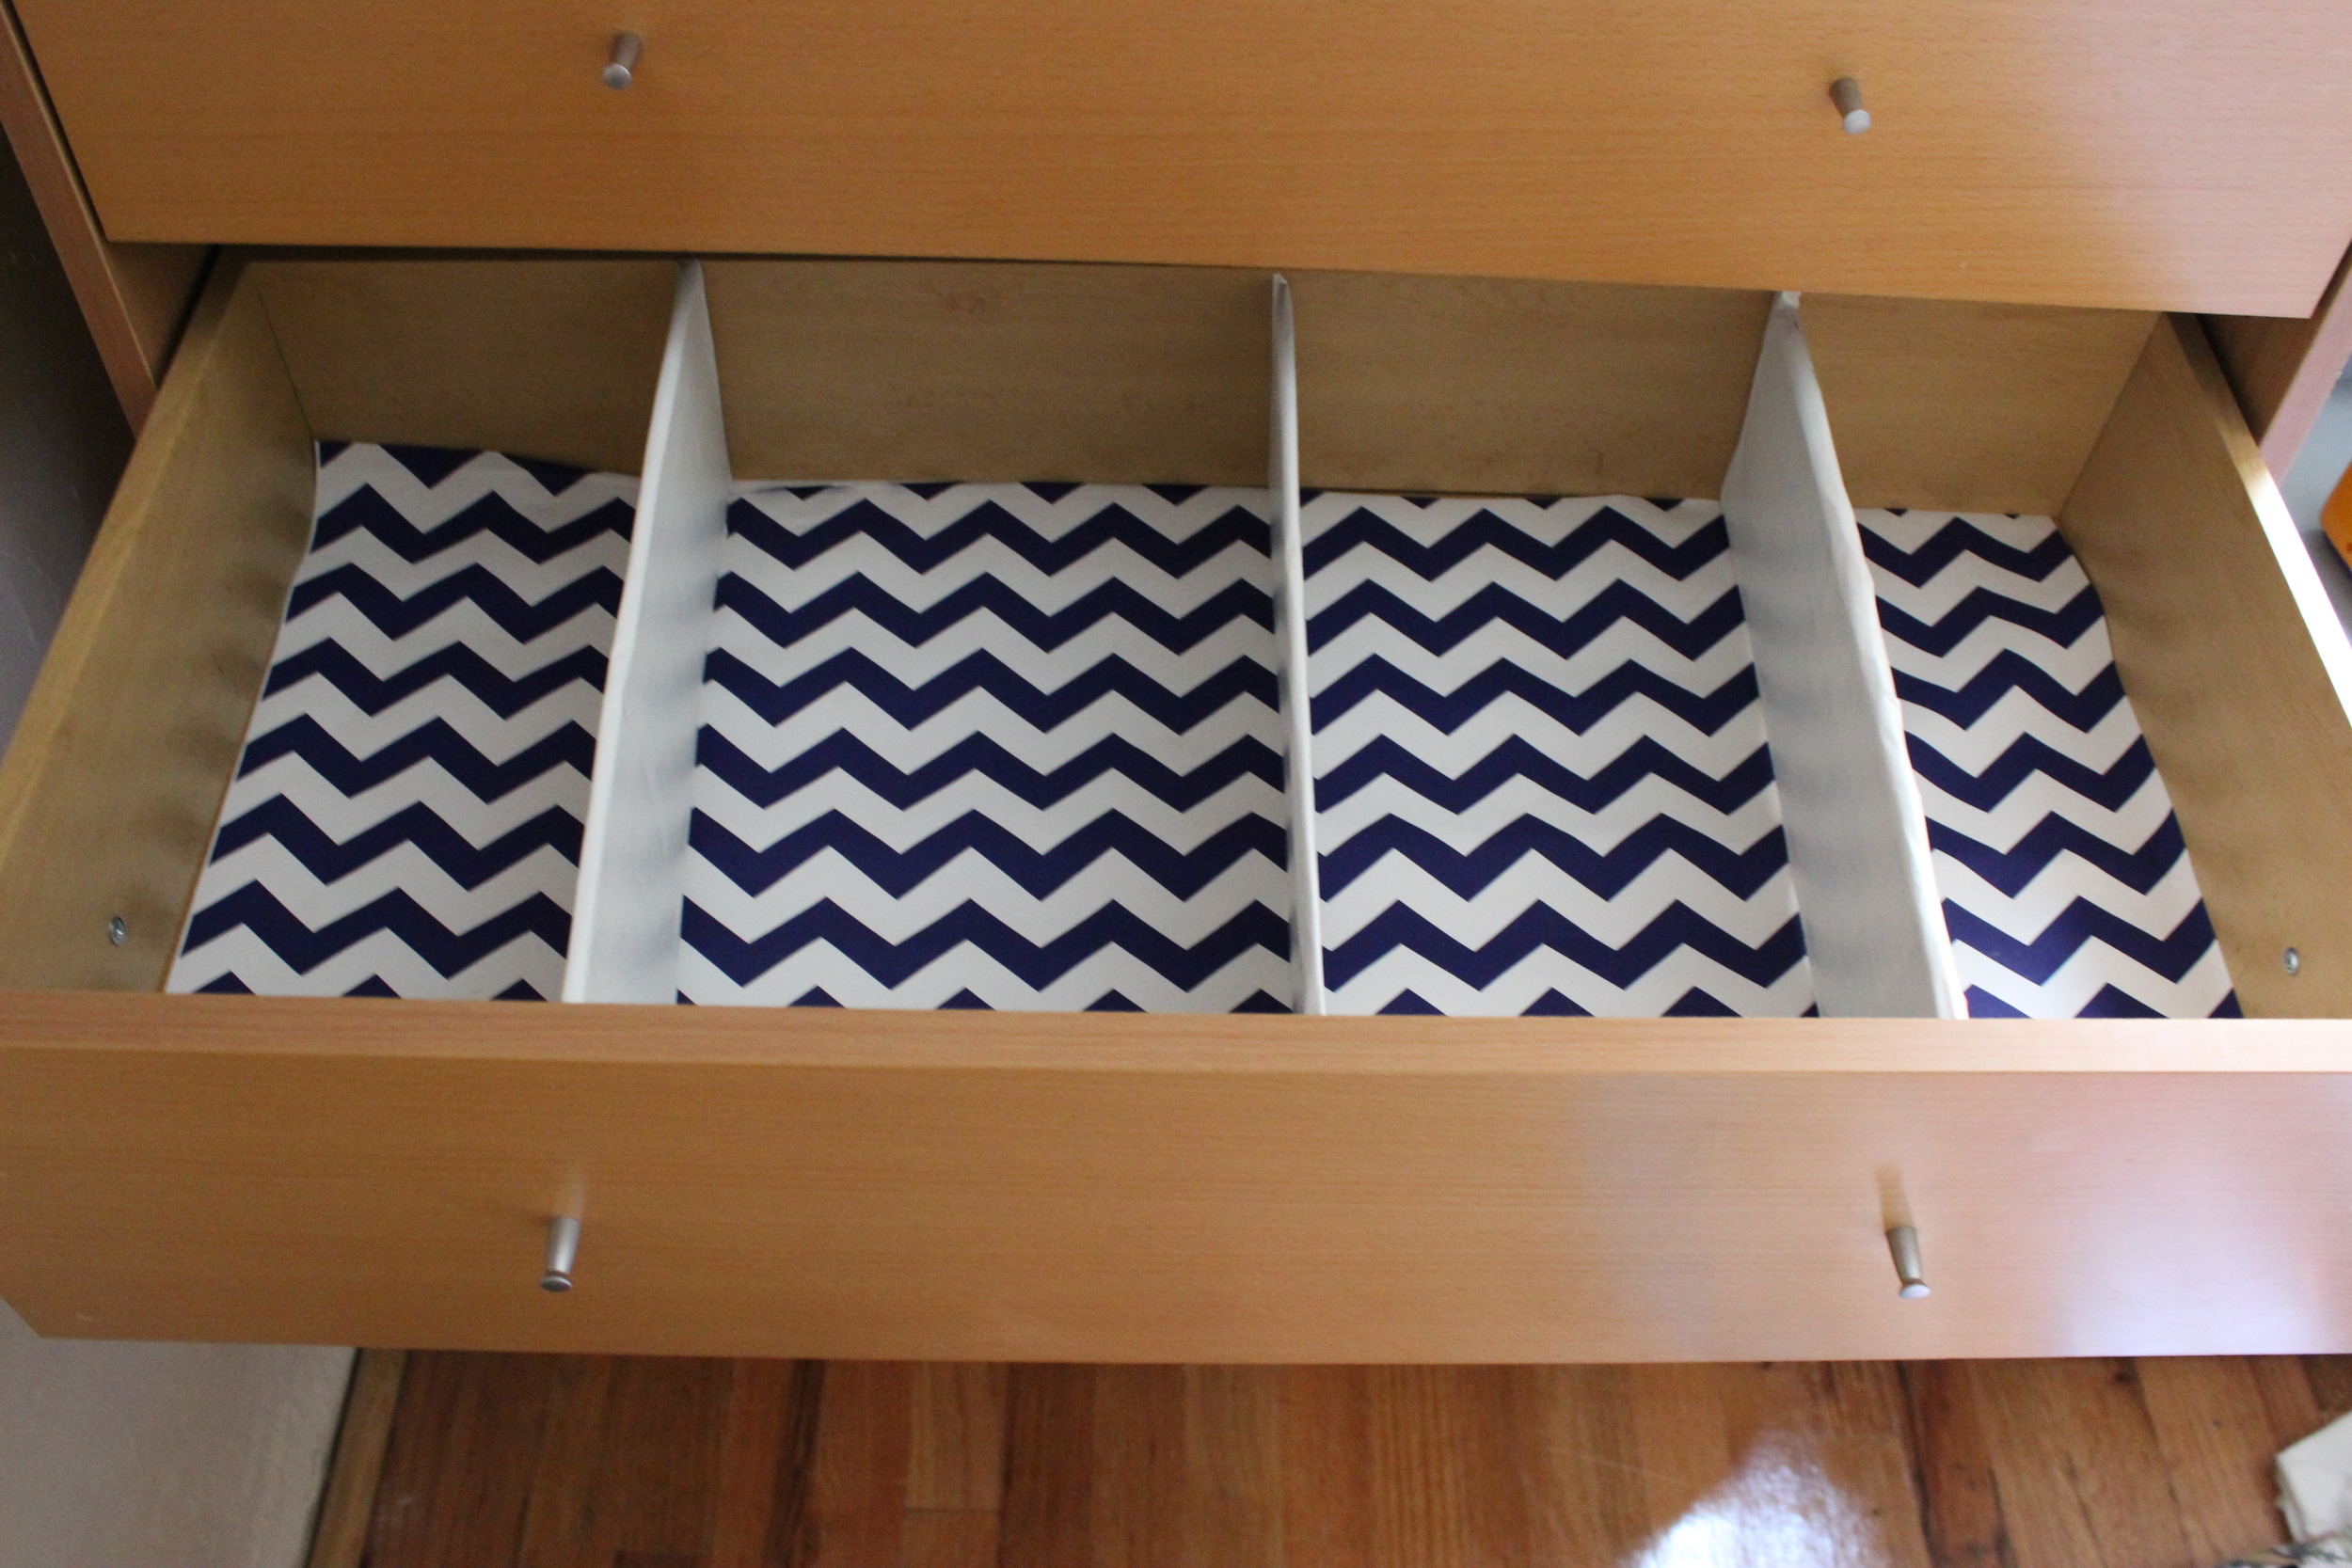 Cardboard drawers + dividers: Organizing drawers with cardboard